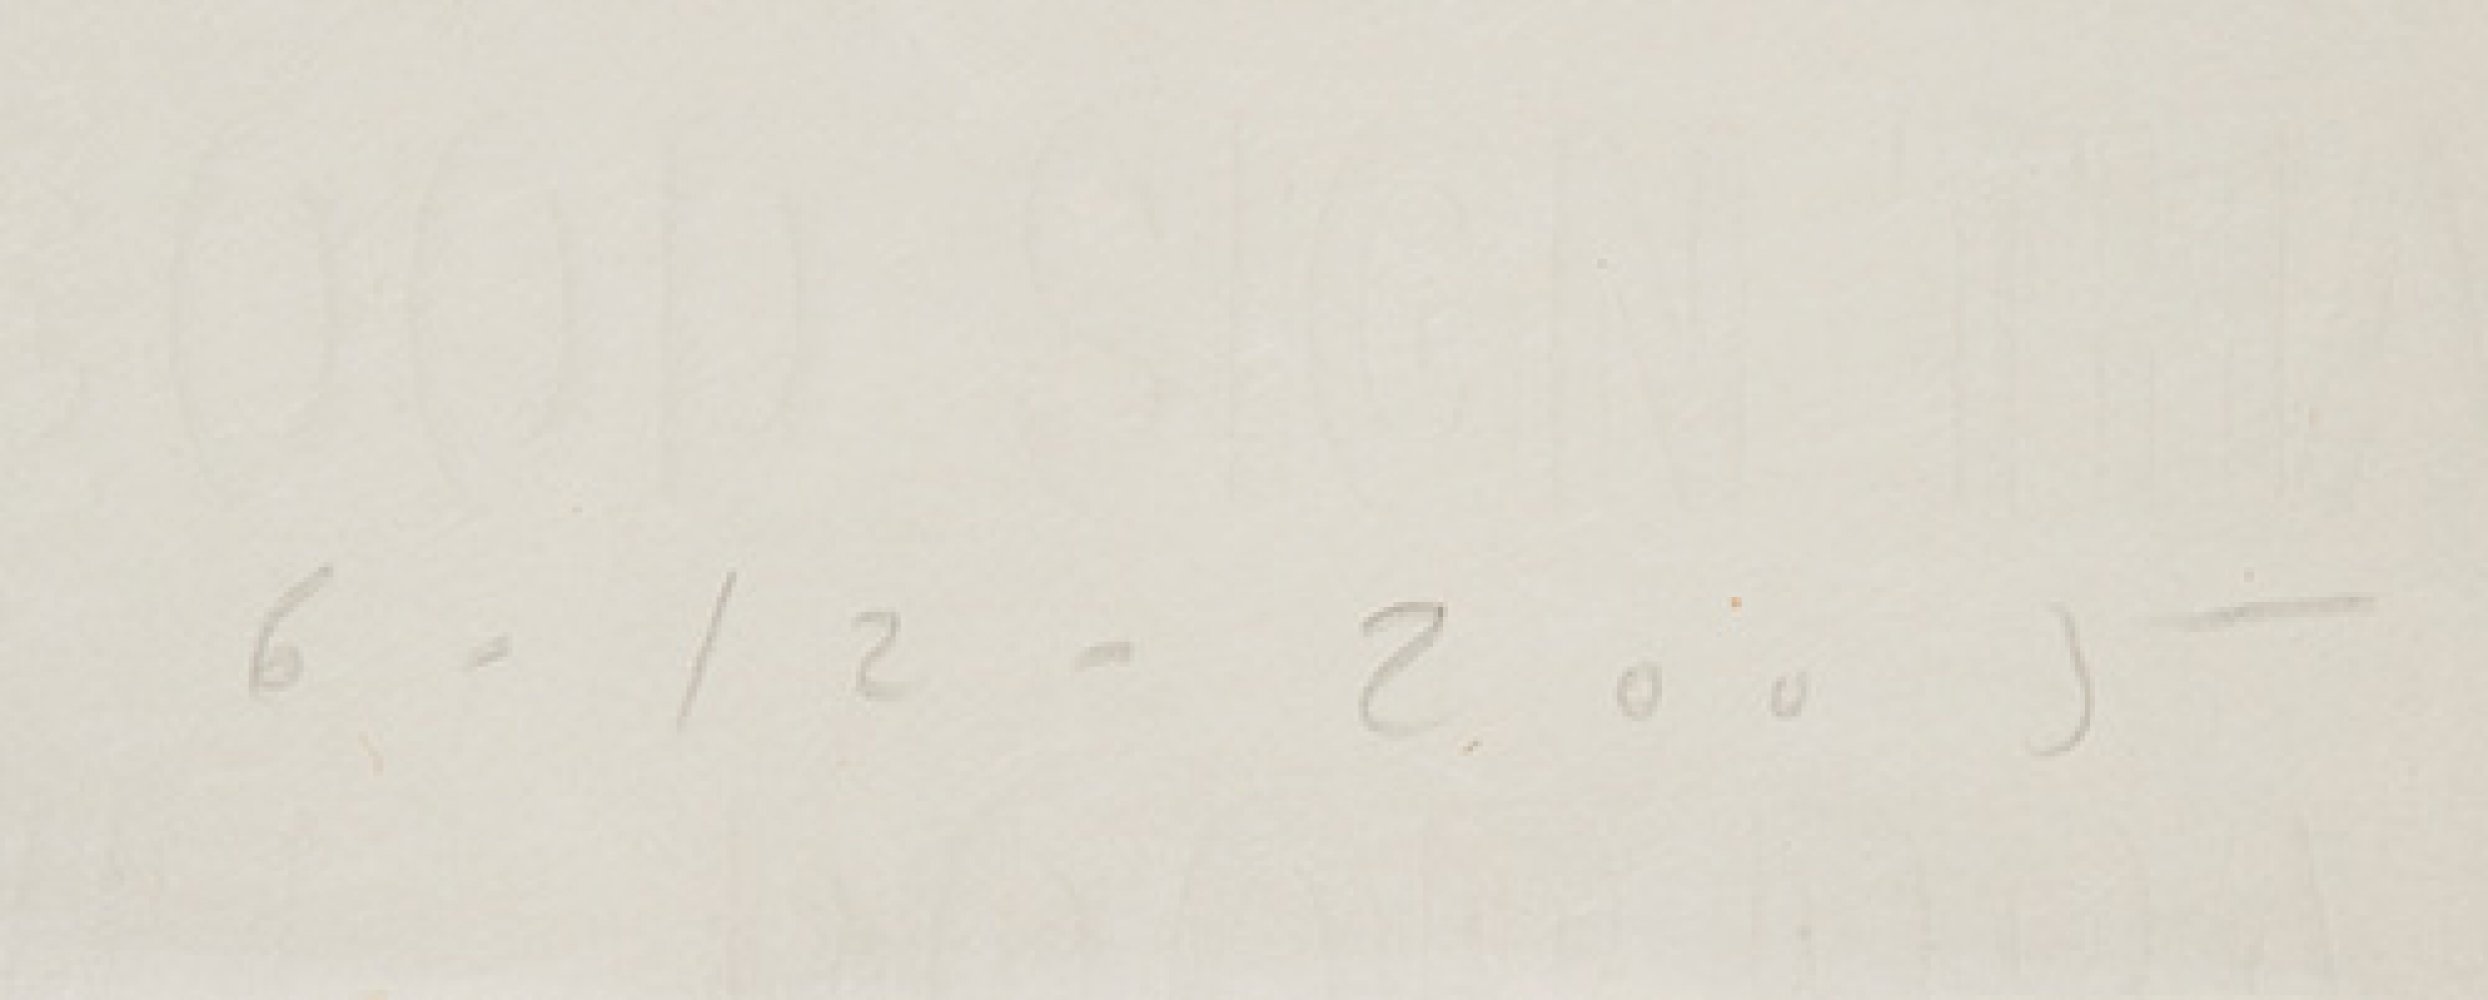 JAUME PLENSA (Barcelona, 1955)."Anonim I", 2005-Lithography and etching on Kôzo paper (20gr). Copy - Image 4 of 5